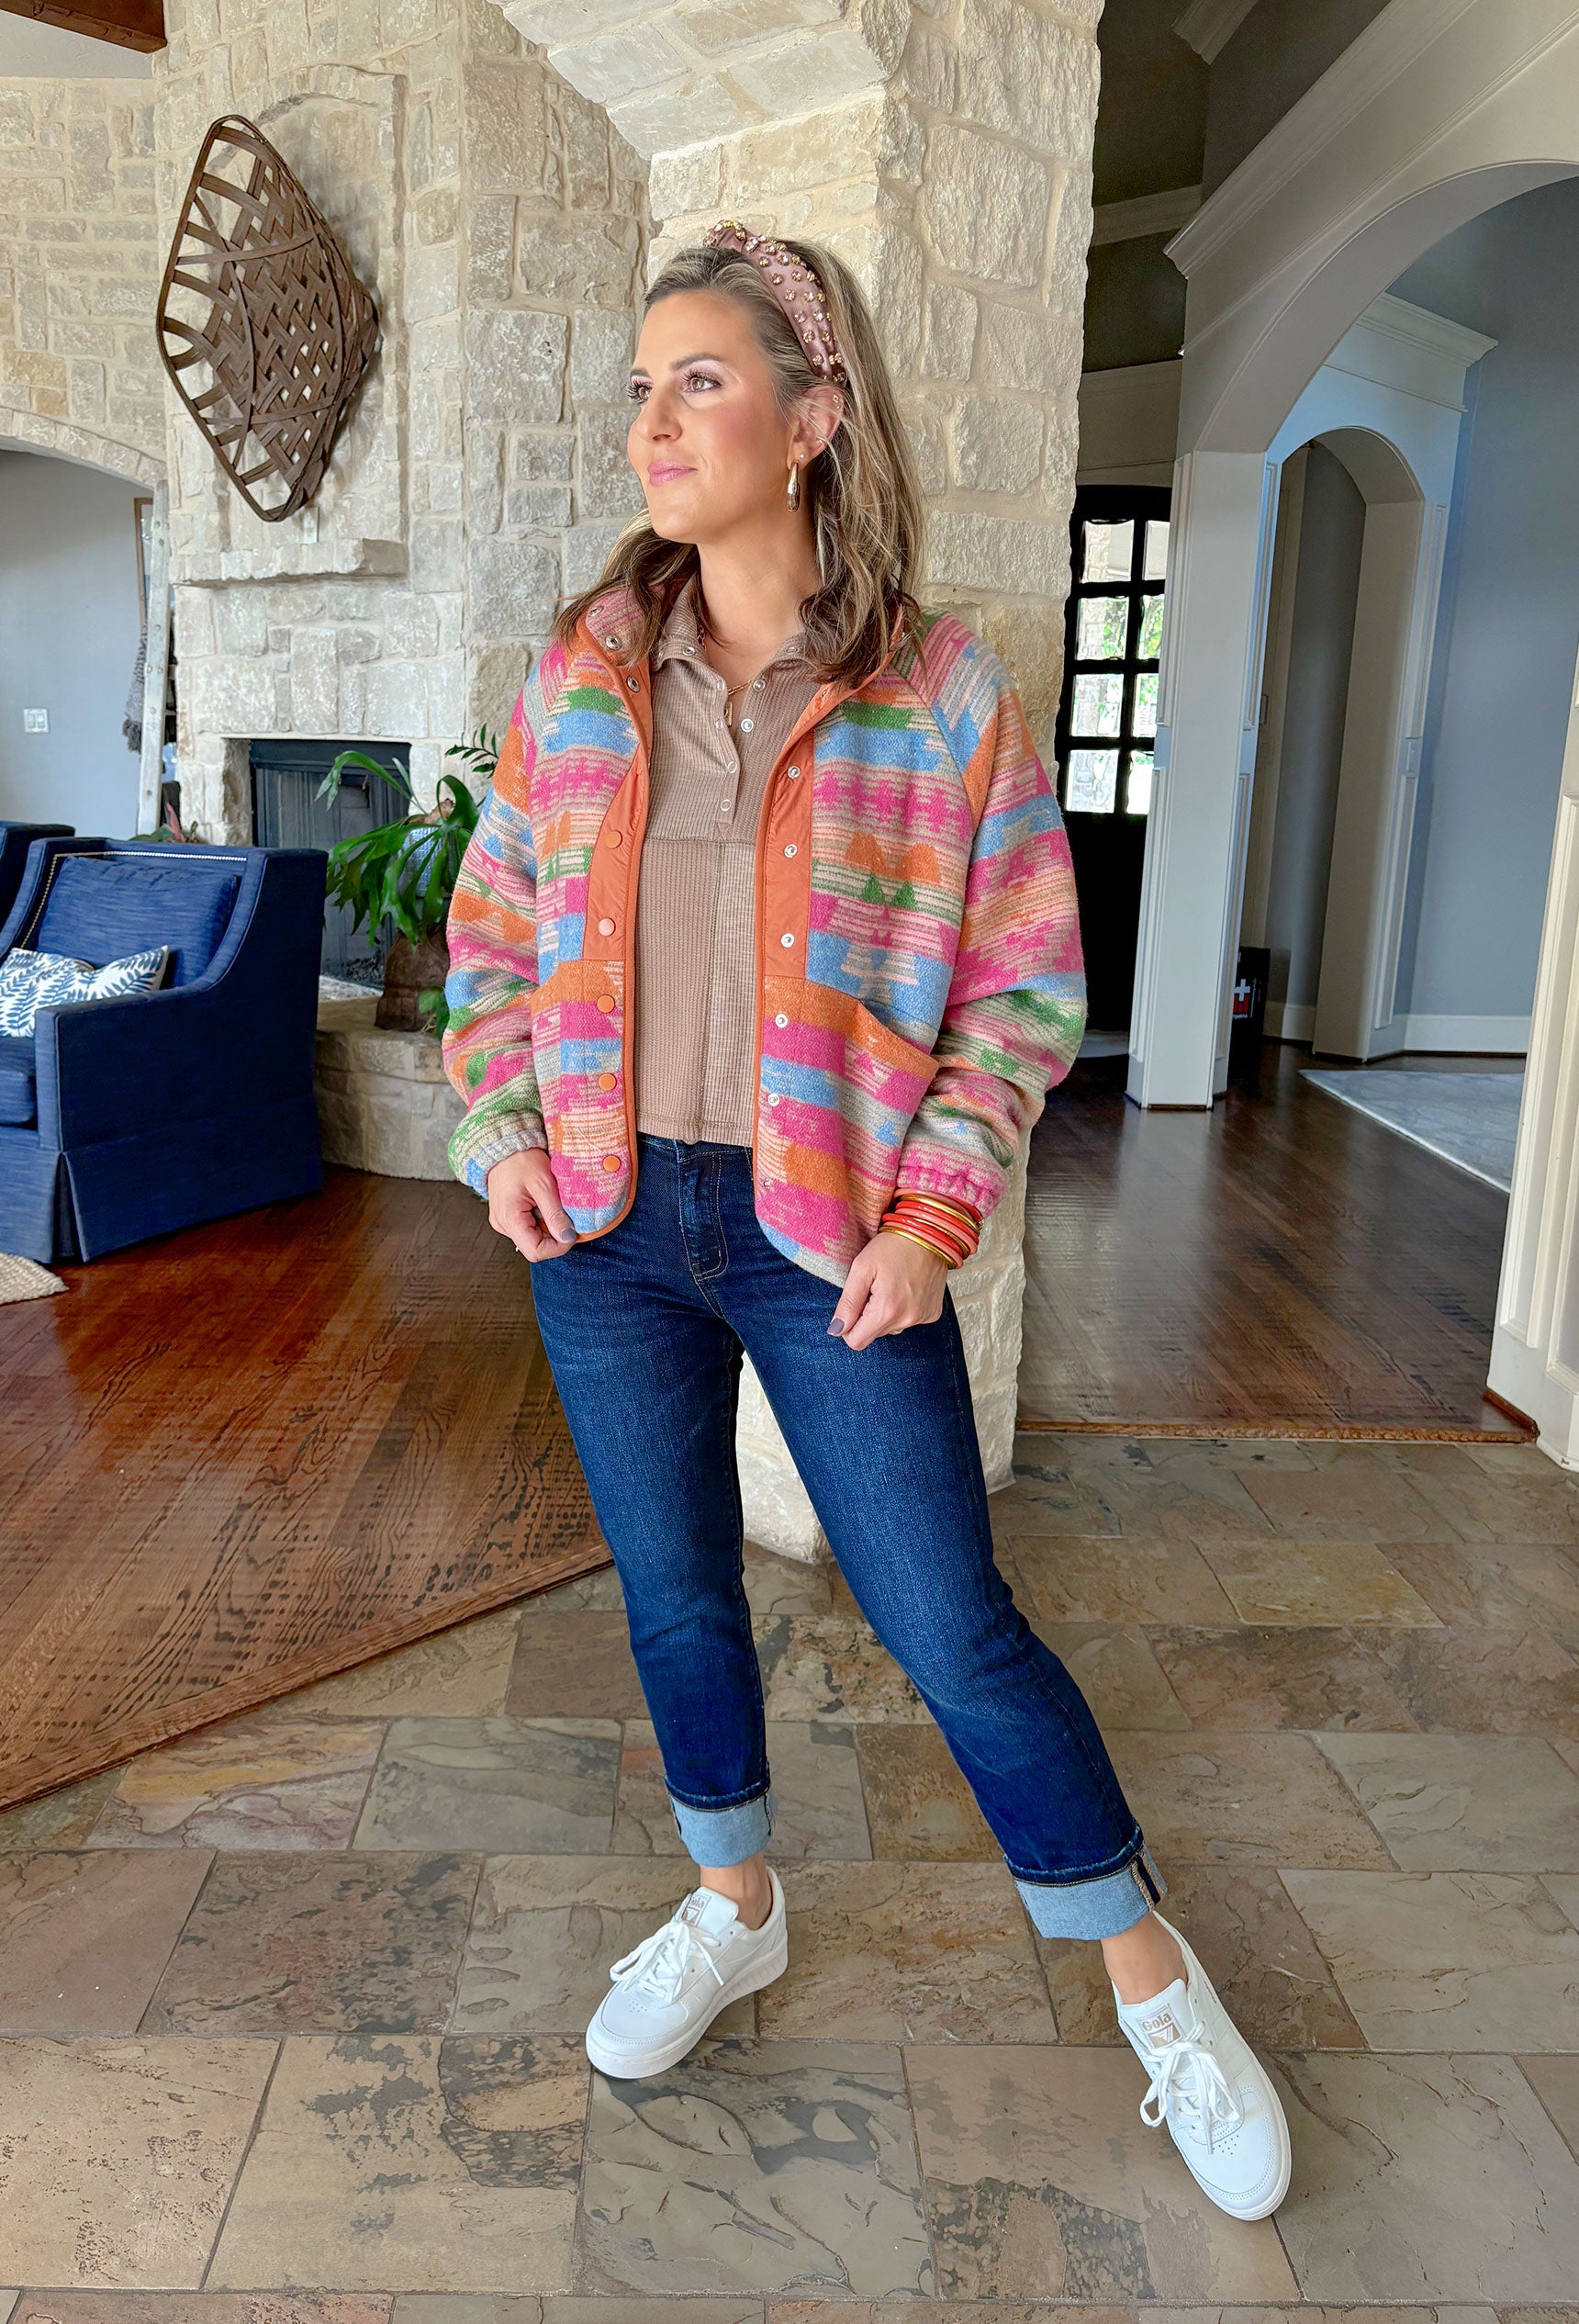 Roaming The City Jacket, colorful aztec print snap button retro-inspired fleece jacket